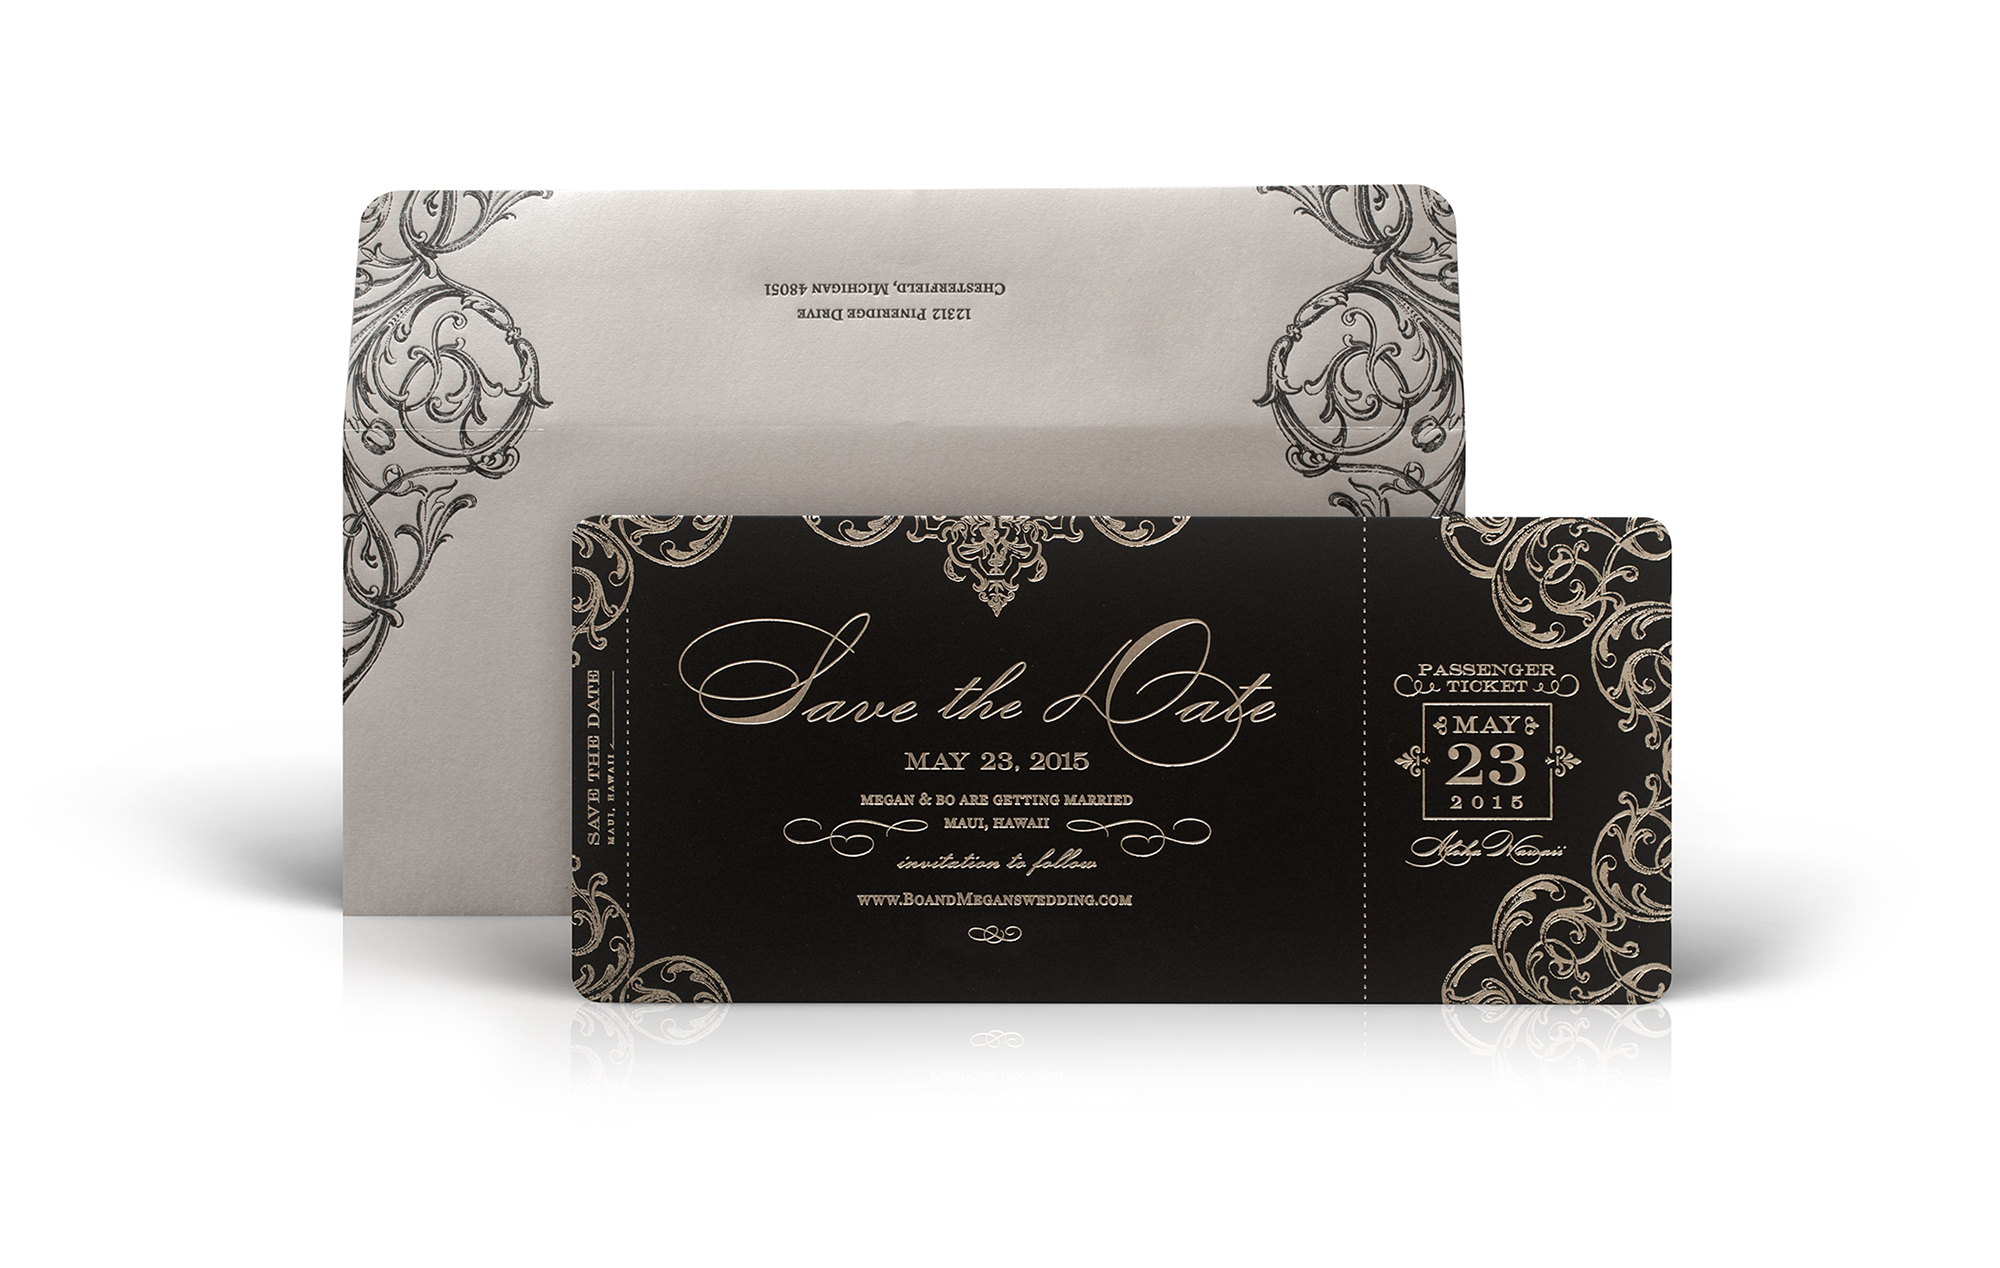 Boarding pass save the date for a Hawaii destination wedding